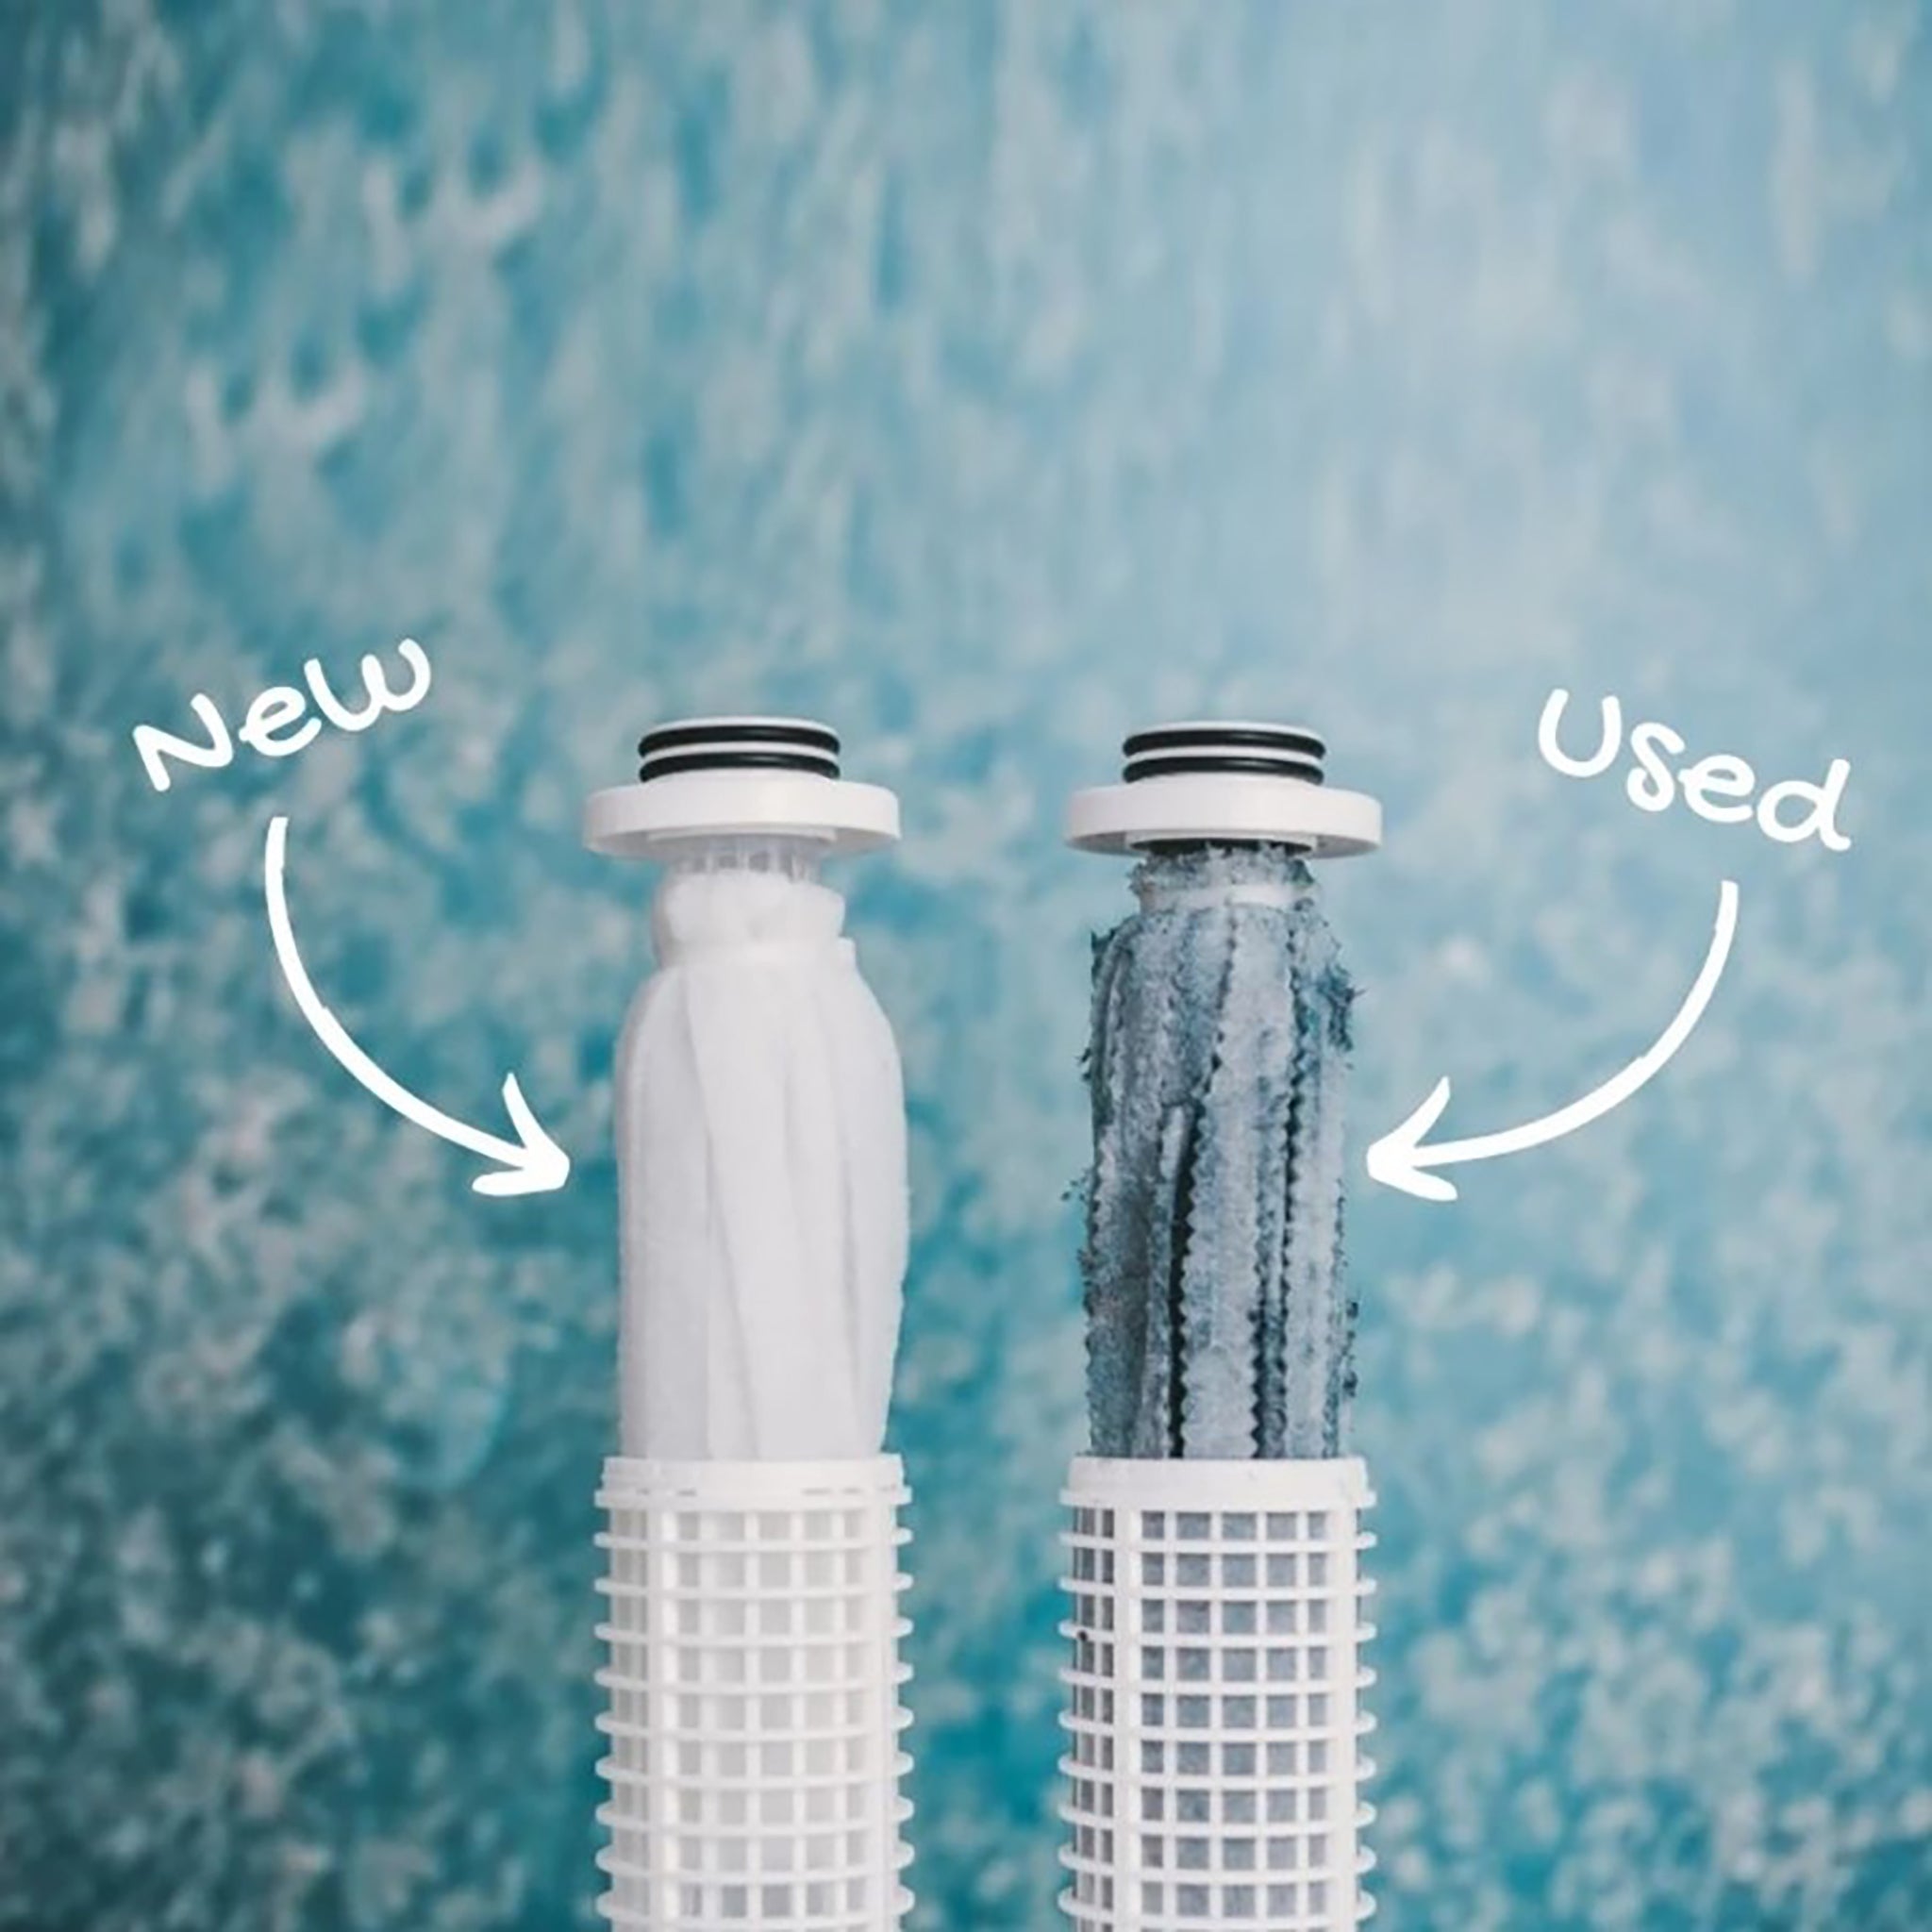 A used PlanetCare Microfiber filter compared to a new microfiber filter